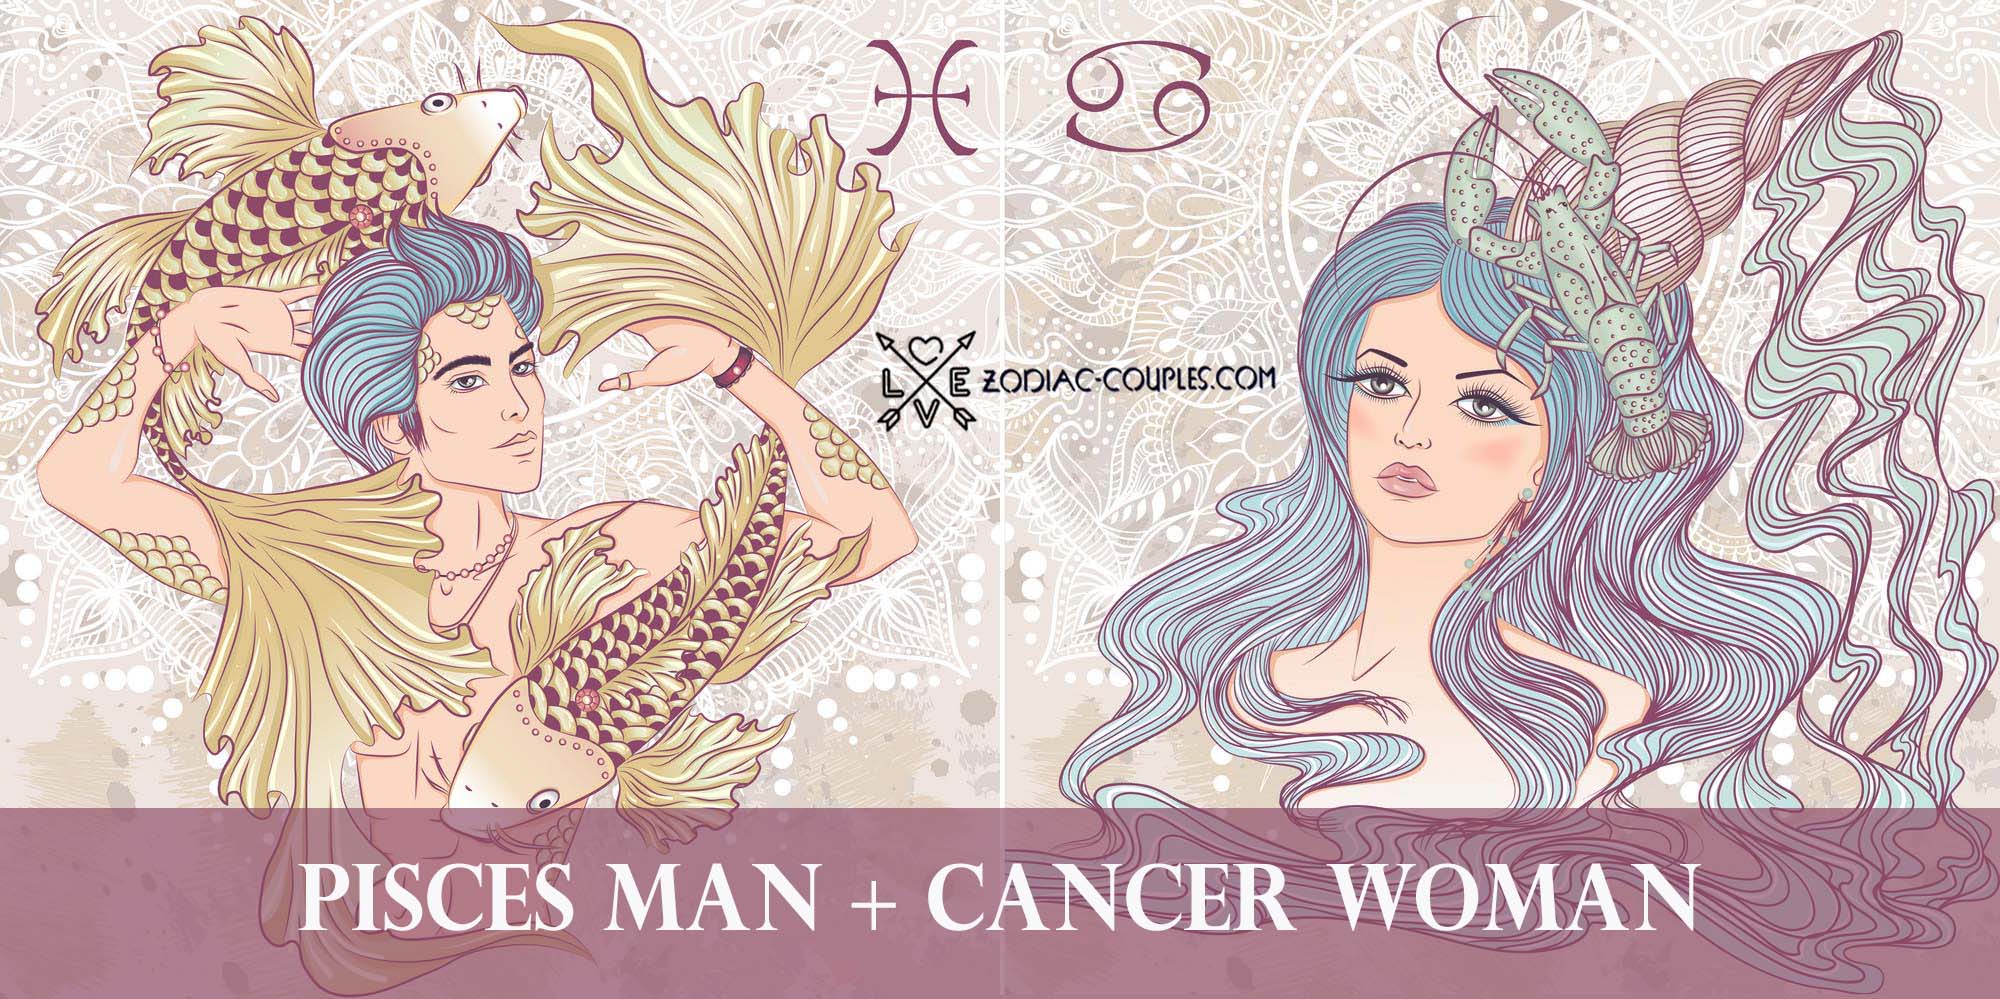 Romantic relationships and marriage of Pisces man and Cancer woman: are the...